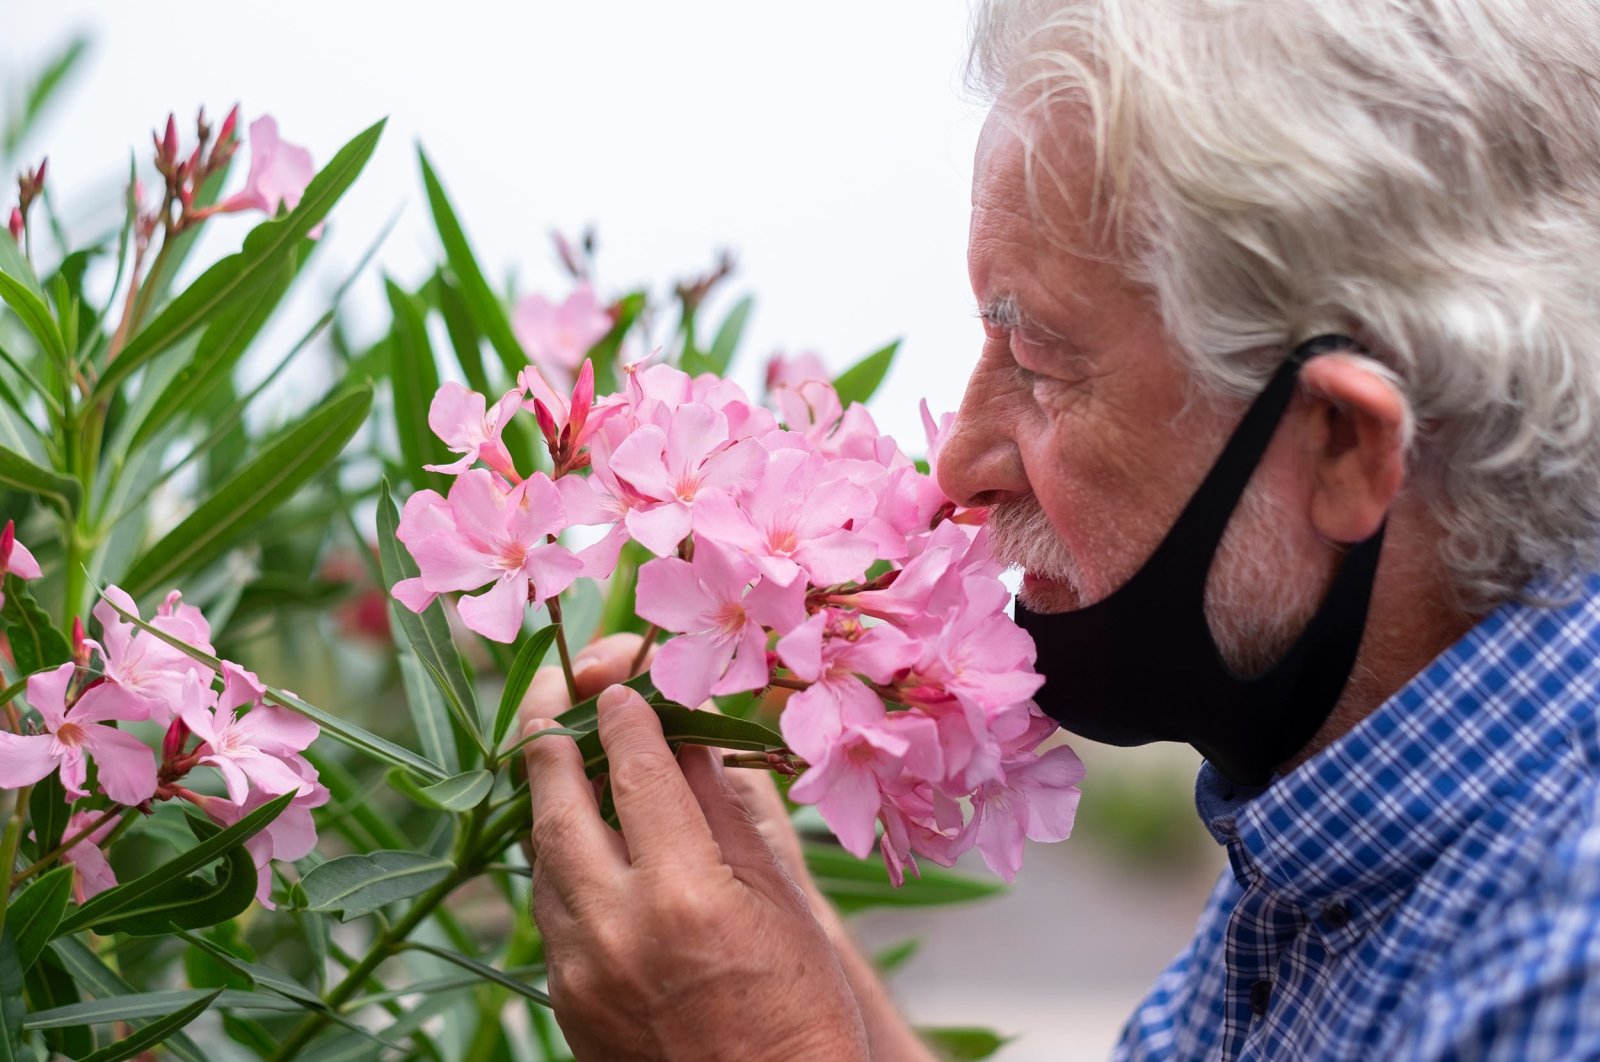 Some COVID-19 patients suffer from loss of smell and require months of therapy to reacquire the sense, according to experts. (Shutterstock Photo)